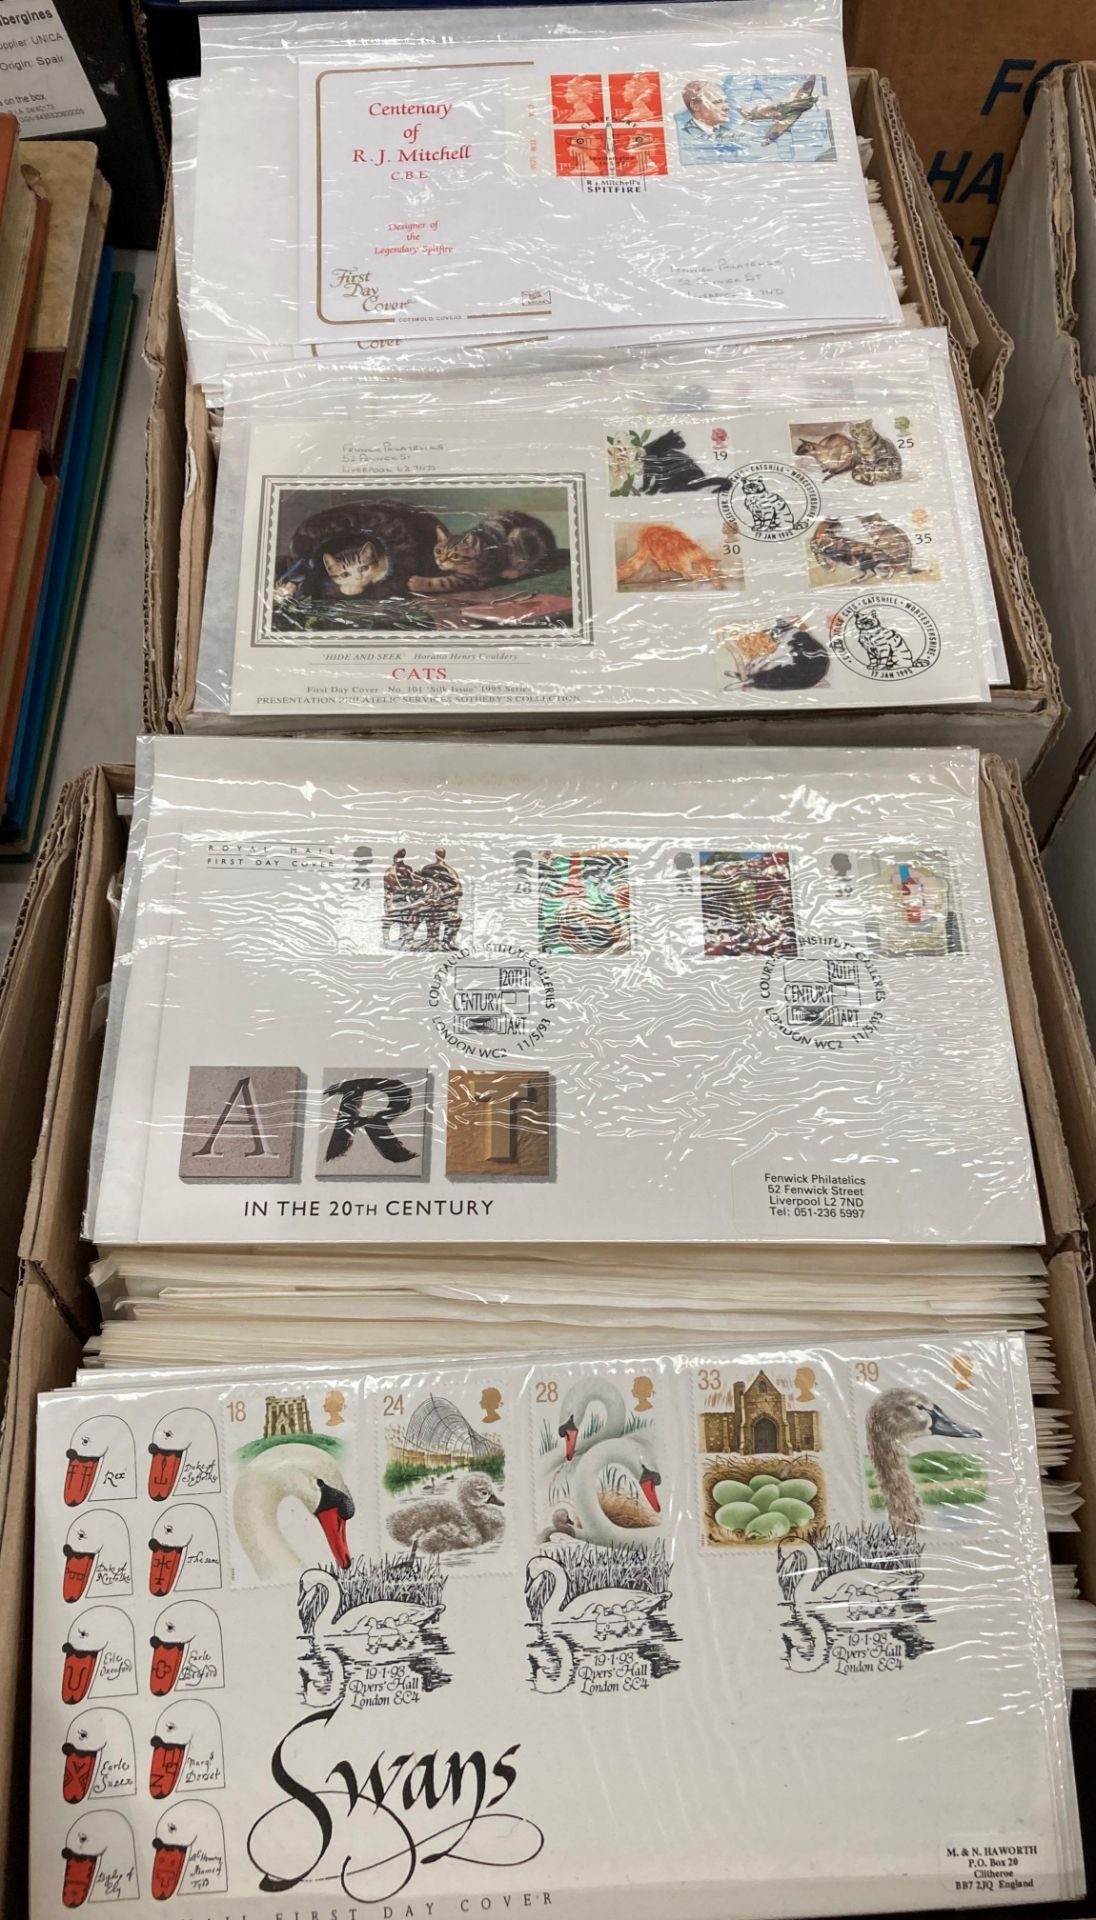 Two boxes of First Day Covers (approximately 400) - multiples including Island Waterways, Swans,